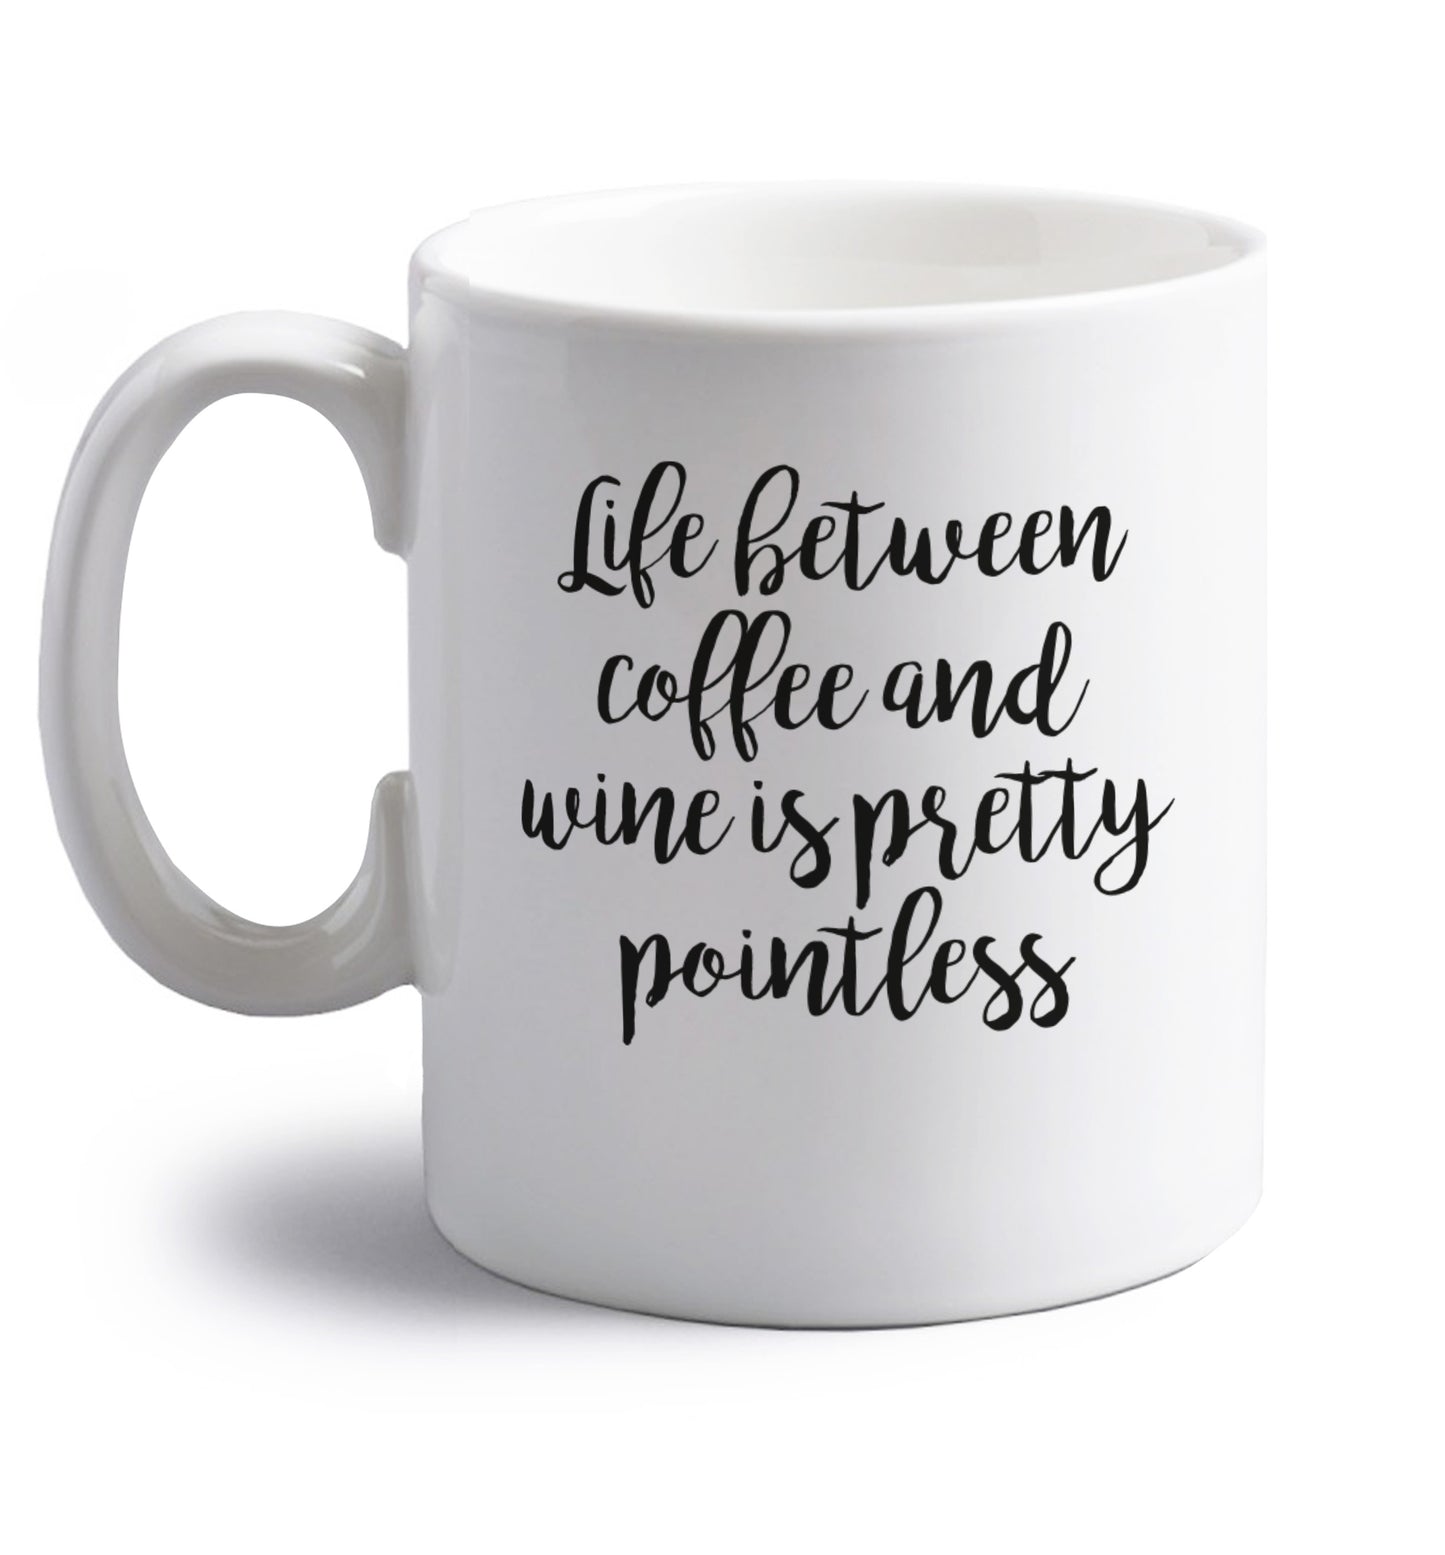 Life between coffee and wine is pretty pointless right handed white ceramic mug 